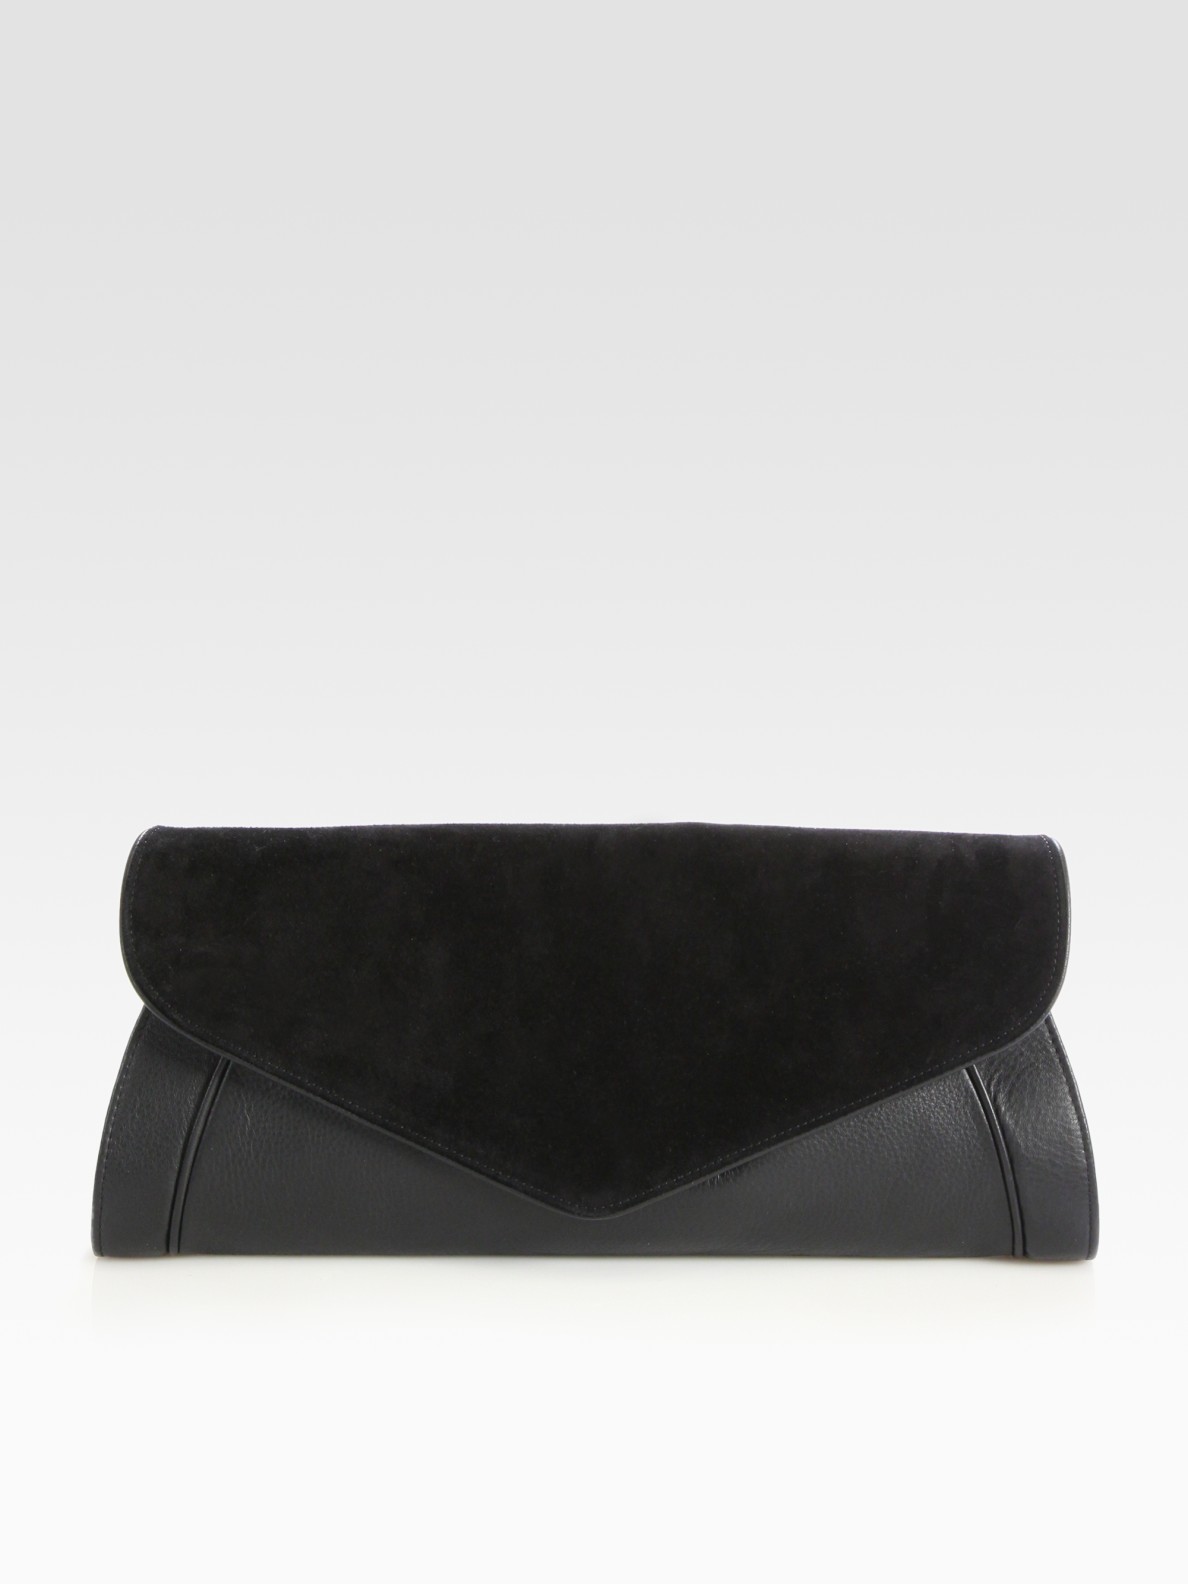 See by chlo Anna Leather and Suede Clutch in Black | Lyst